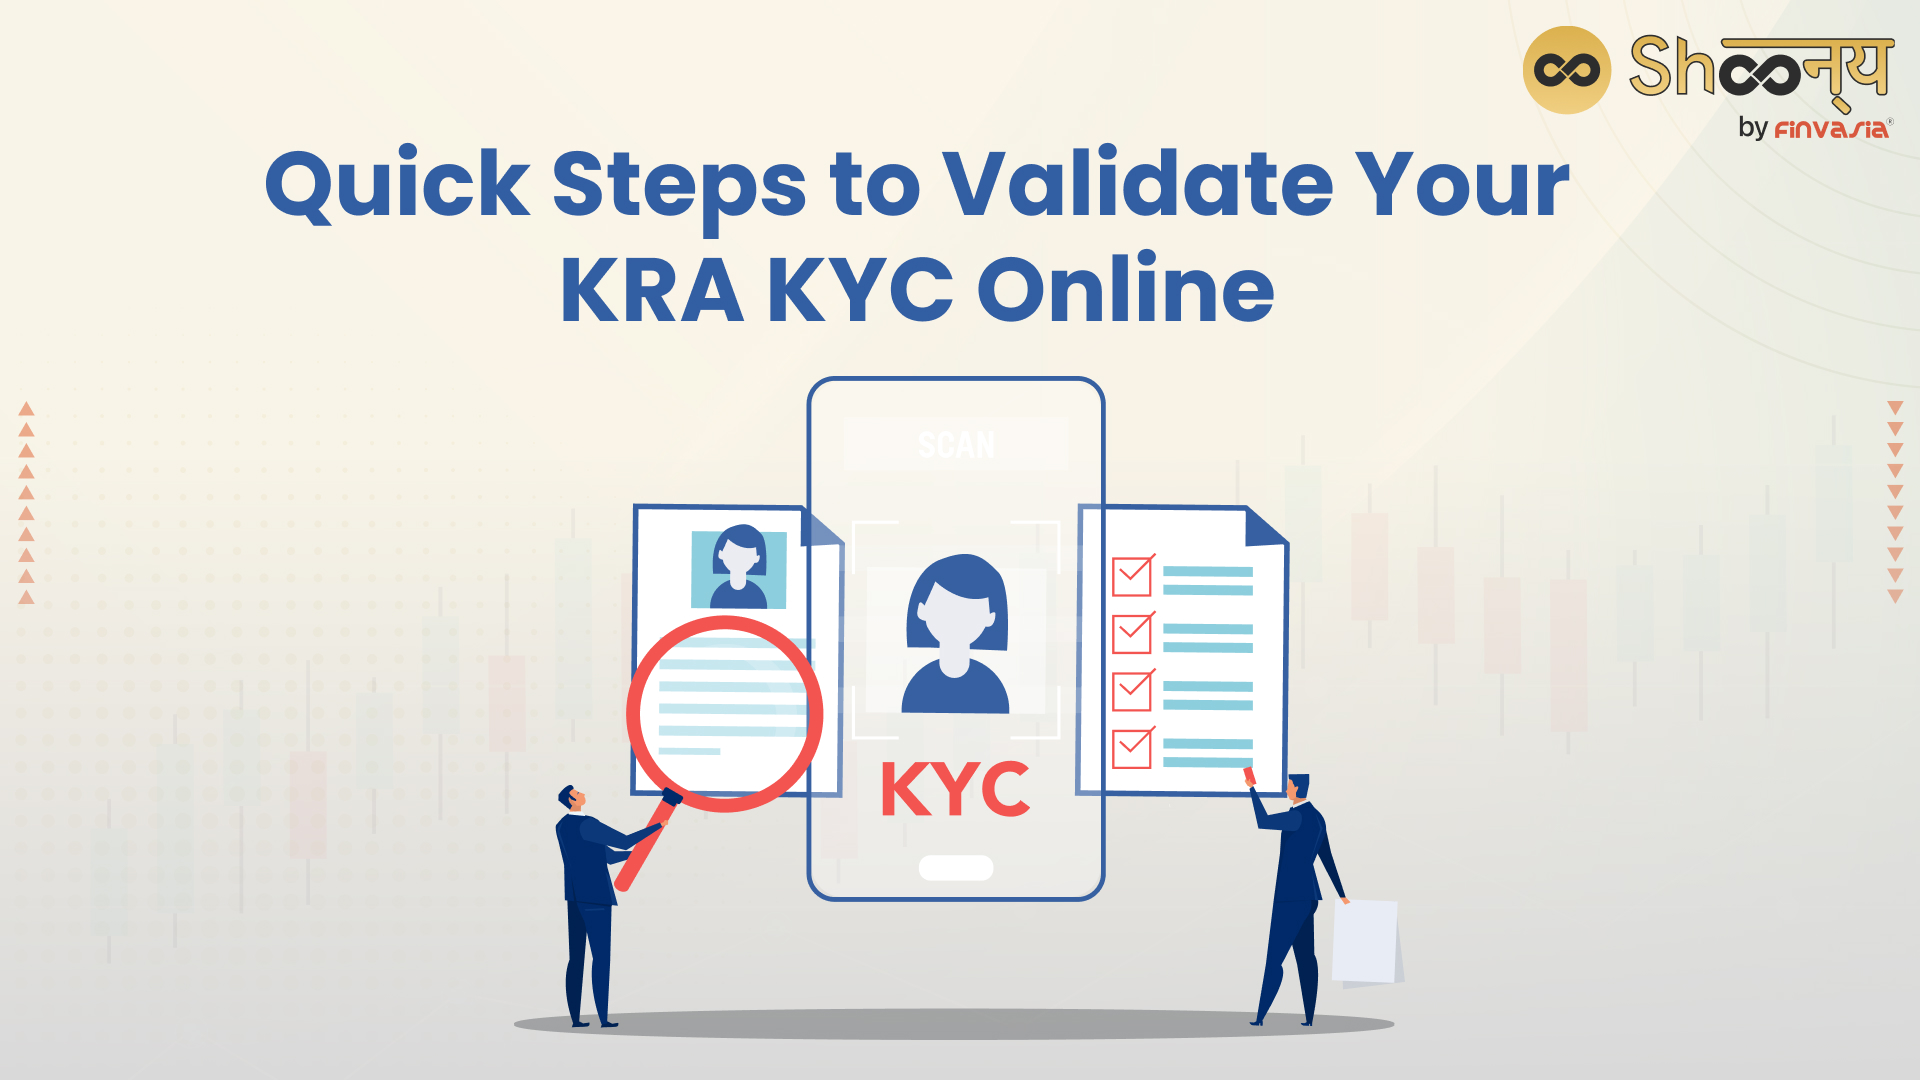 Quick Steps to Validate Your KRA KYC Online